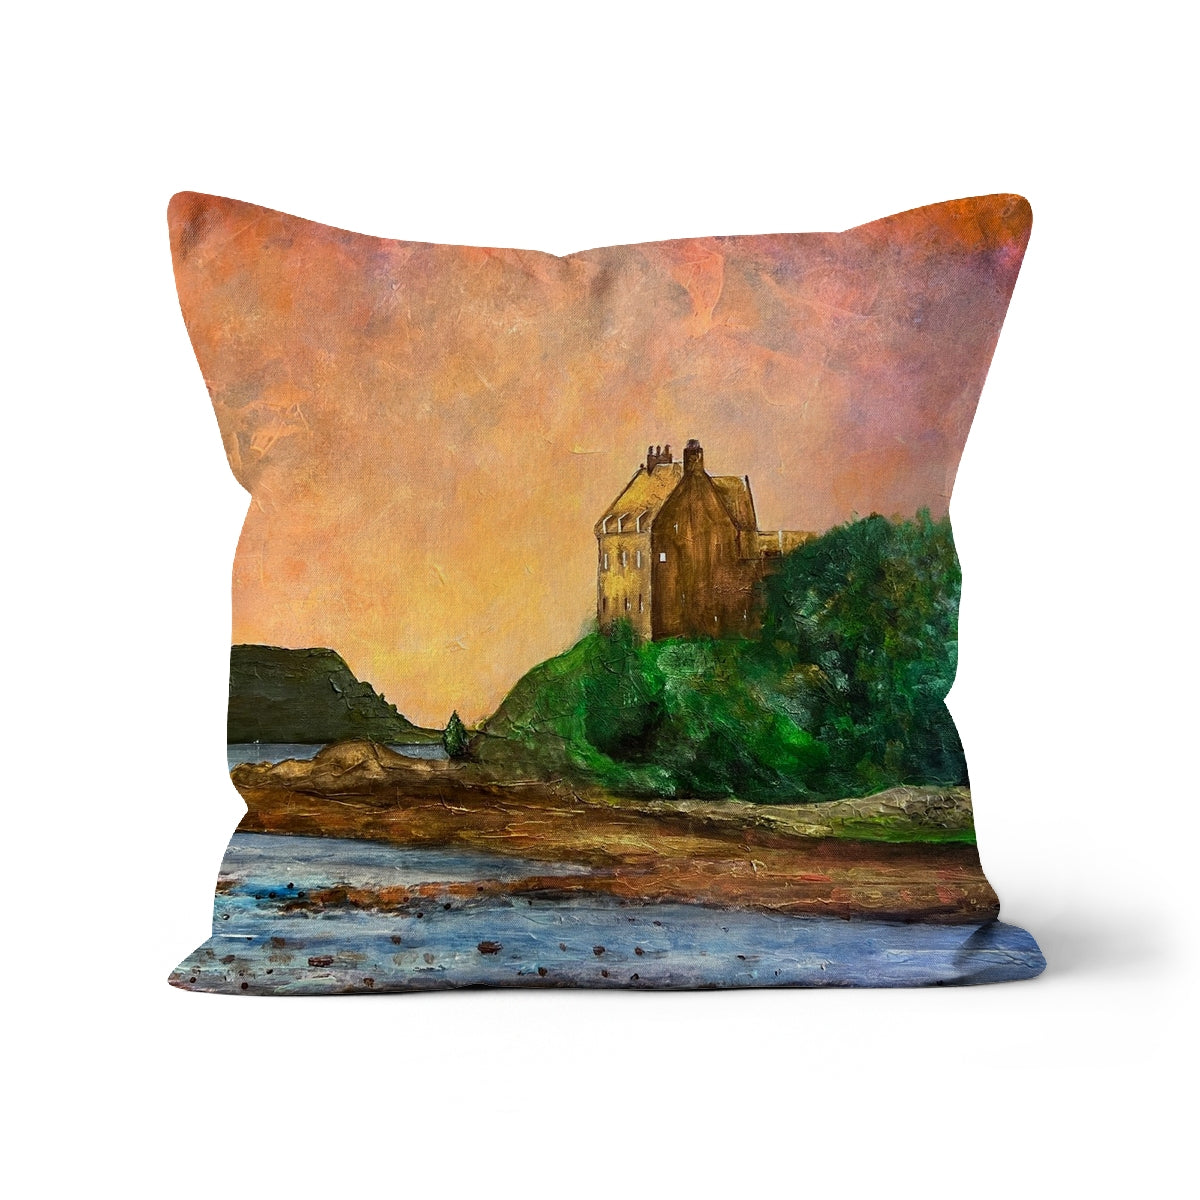 Duntrune Castle Art Gifts Cushion-Cushions-Historic & Iconic Scotland Art Gallery-Linen-22"x22"-Paintings, Prints, Homeware, Art Gifts From Scotland By Scottish Artist Kevin Hunter